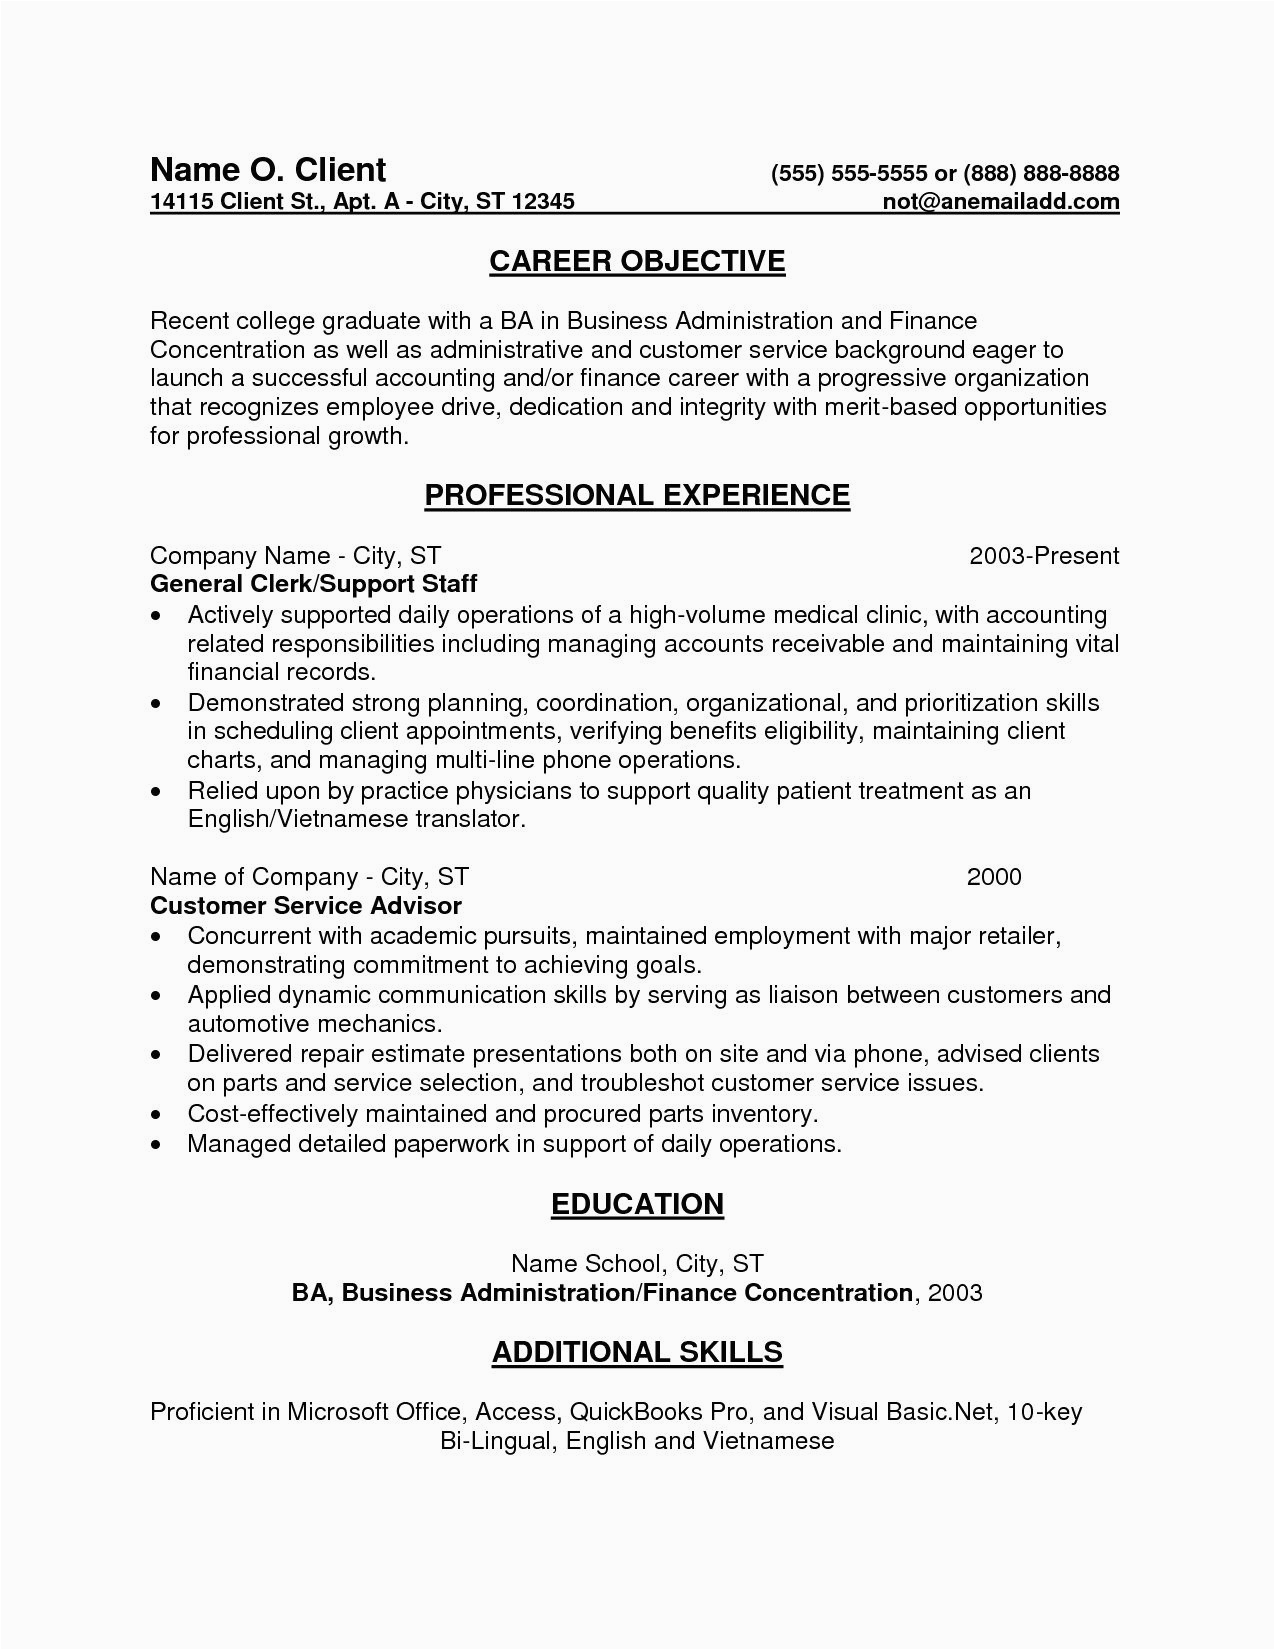 Entry Level Job Resume Objective Samples Entry Level Accounting Cover Letter Lovely Resume Objective Entry Level